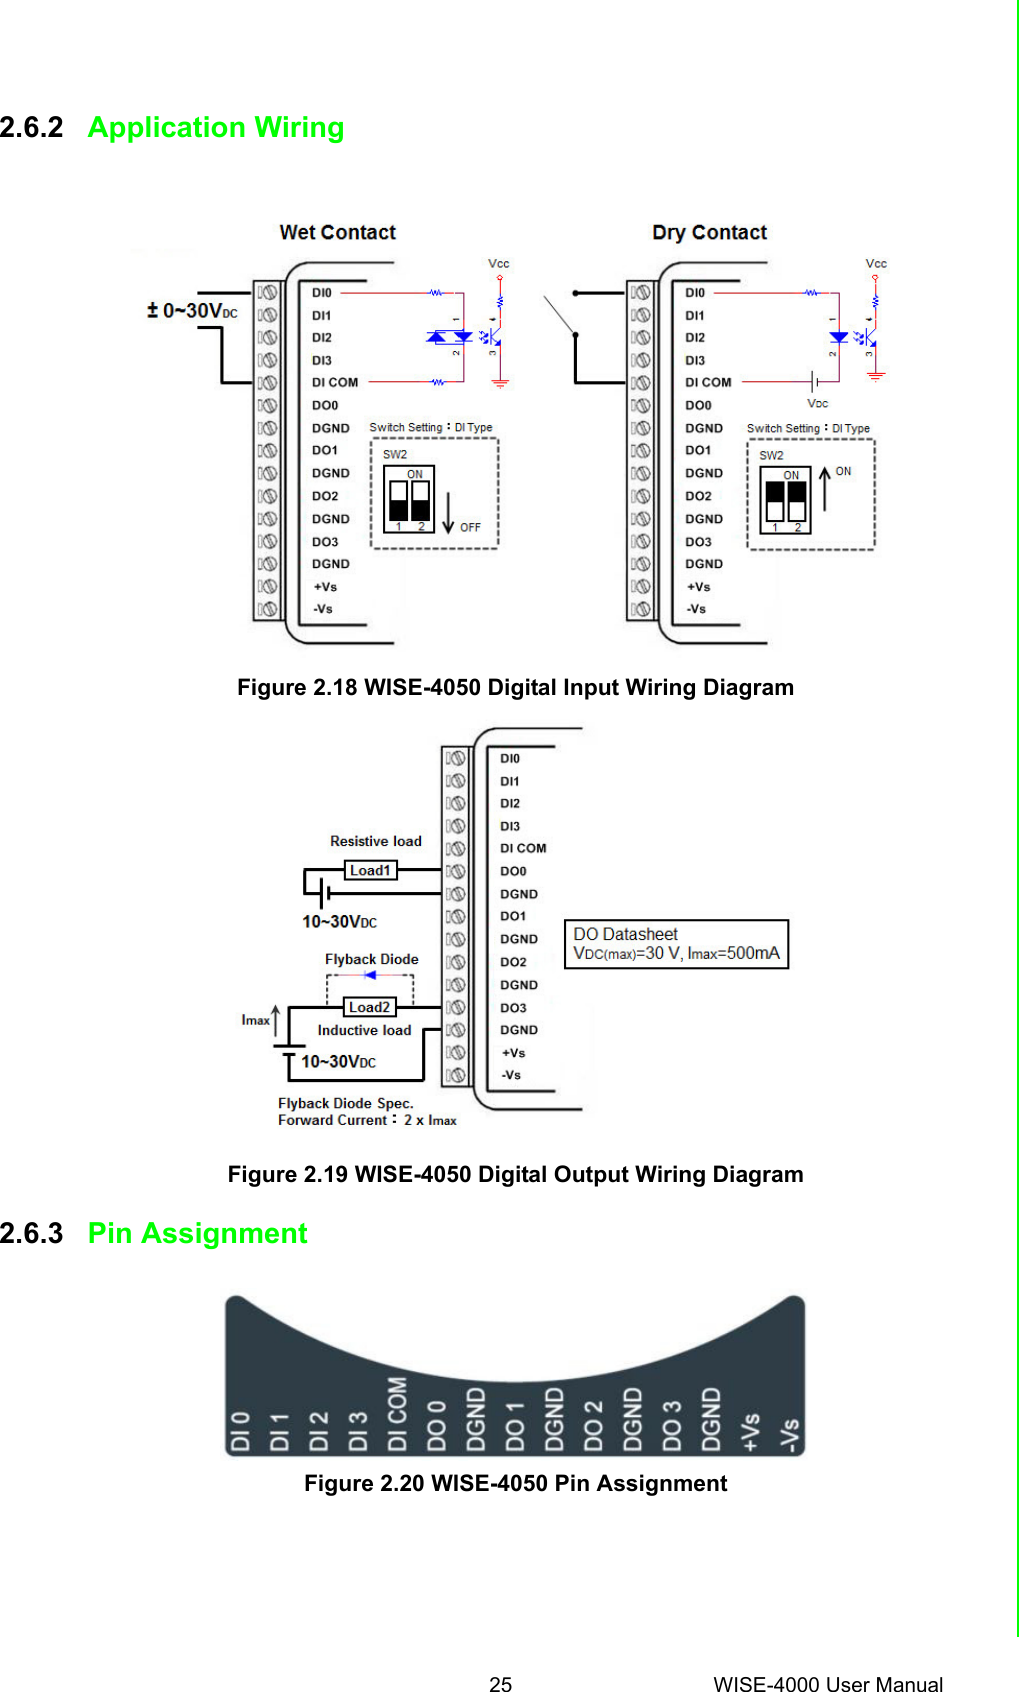 25 WISE-4000 User ManualChapter 2 Product Specifications2.6.2 Application WiringFigure 2.18 WISE-4050 Digital Input Wiring DiagramFigure 2.19 WISE-4050 Digital Output Wiring Diagram2.6.3 Pin AssignmentFigure 2.20 WISE-4050 Pin Assignment